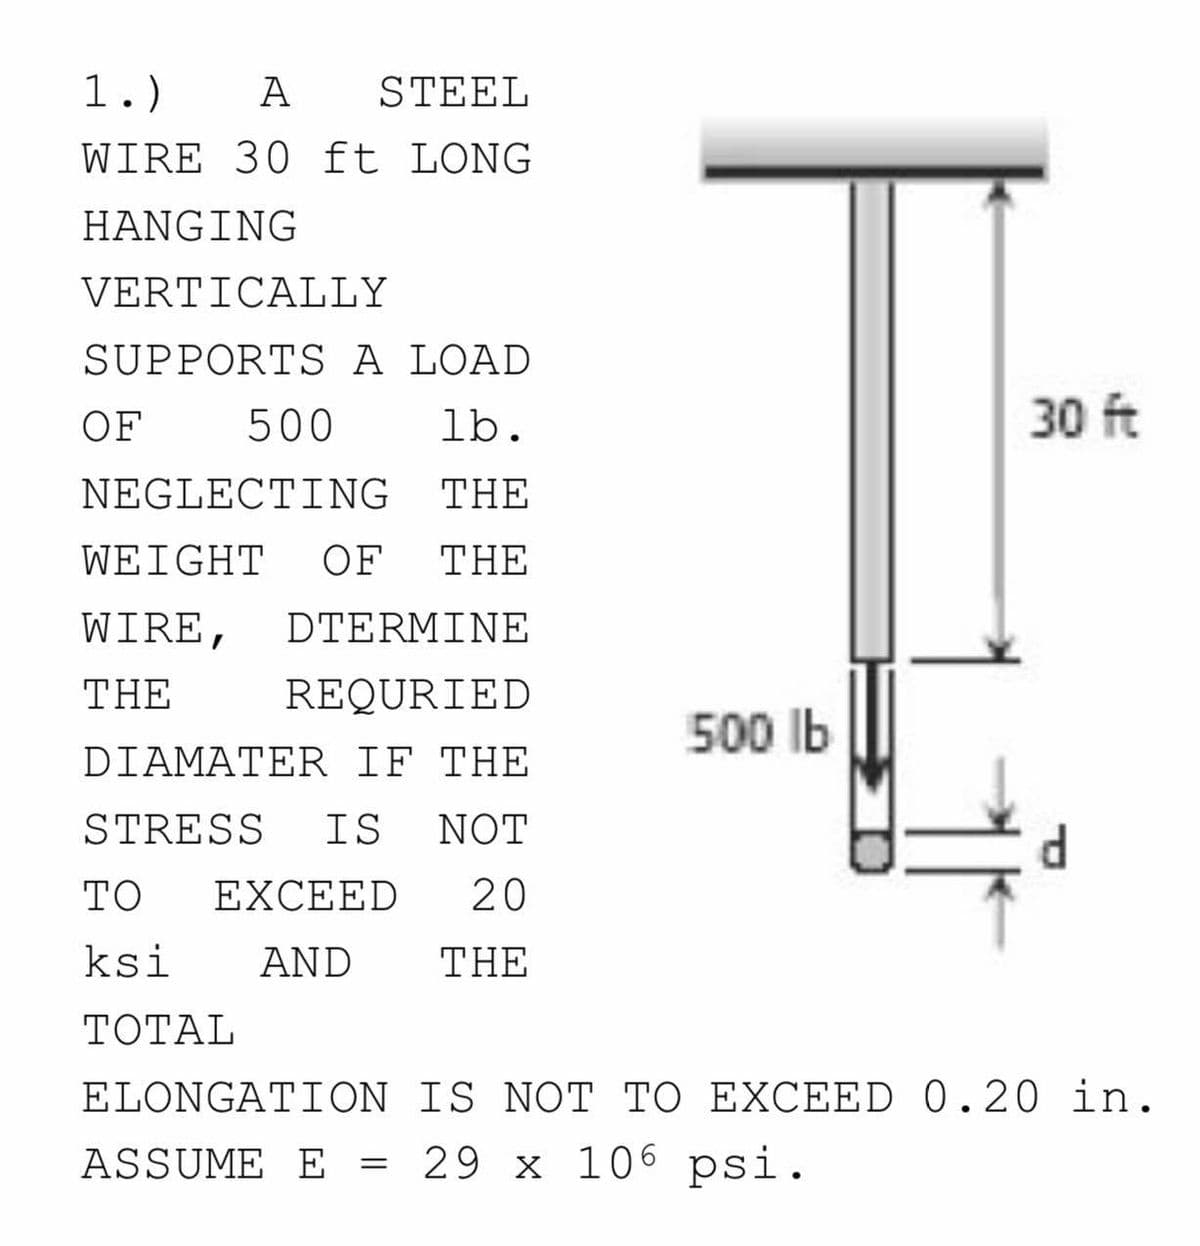 1.)
А
STEEL
WIRE 30 ft LONG
HANGING
VERTICALLY
SUPPORTS A LOAD
OF
500
lb.
30 ft
NEGLECTING
THE
WEIGHT
OF
THE
WIRE,
DTERMΙΝE
THE
REQURIED
500 Ib
DIAMATER IF THE
STRESS
IS
NOT
TO
EXCEED
20
ksi
AND
THE
TOTAL
ELONGATION IS NOT TO EXCEED 0.20 in.
ASSUME E = 29 x 106 psi.
